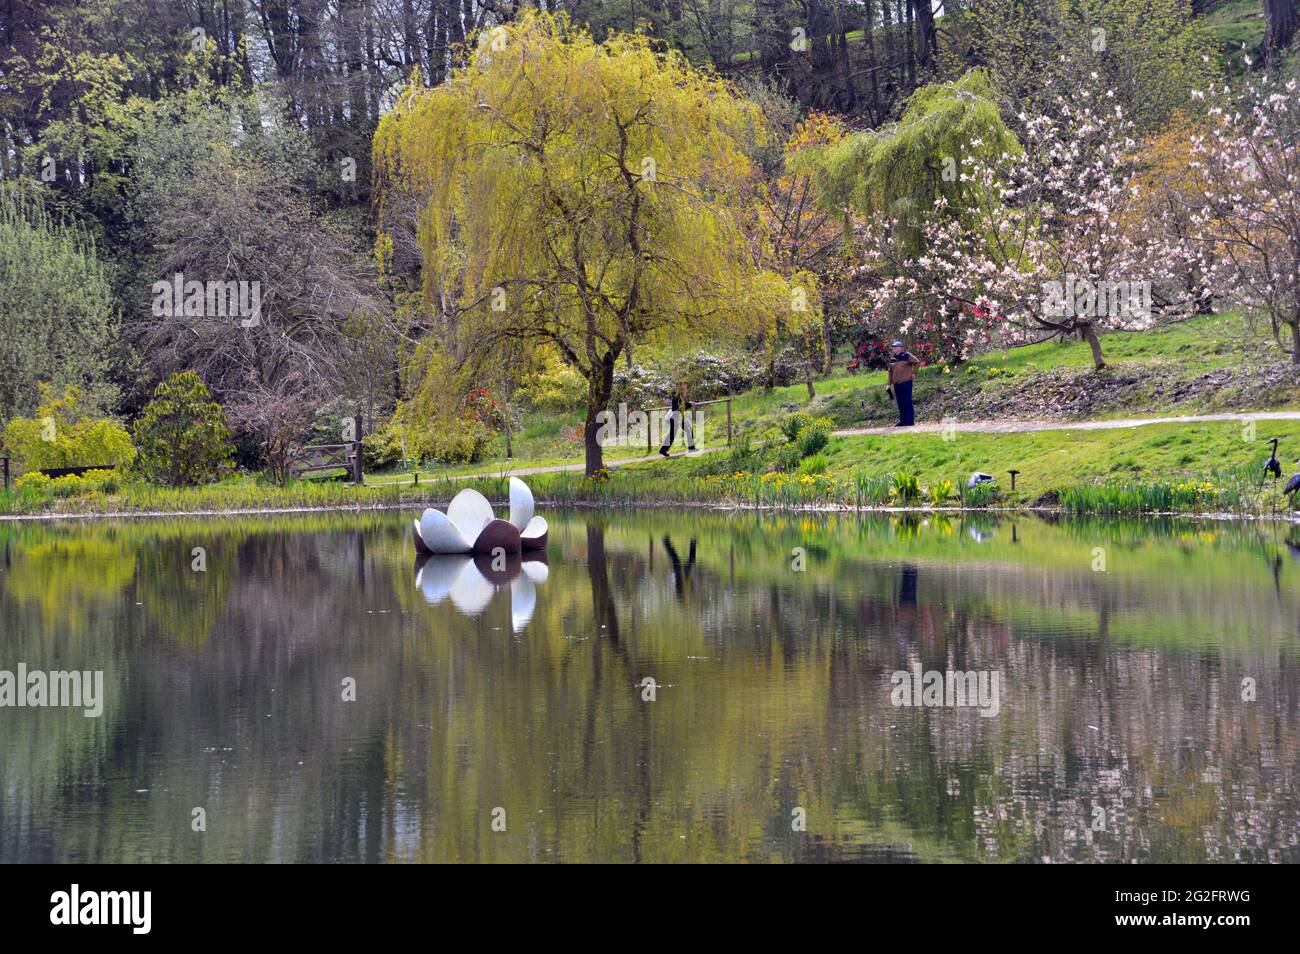 Couple Walking by Floating Lily Sculpture Reflected in the Magnolia Lake, Himalayan Garden & Sculpture Park, Grewelthorpe, Ripon, North Yorkshire, UK. Stock Photo